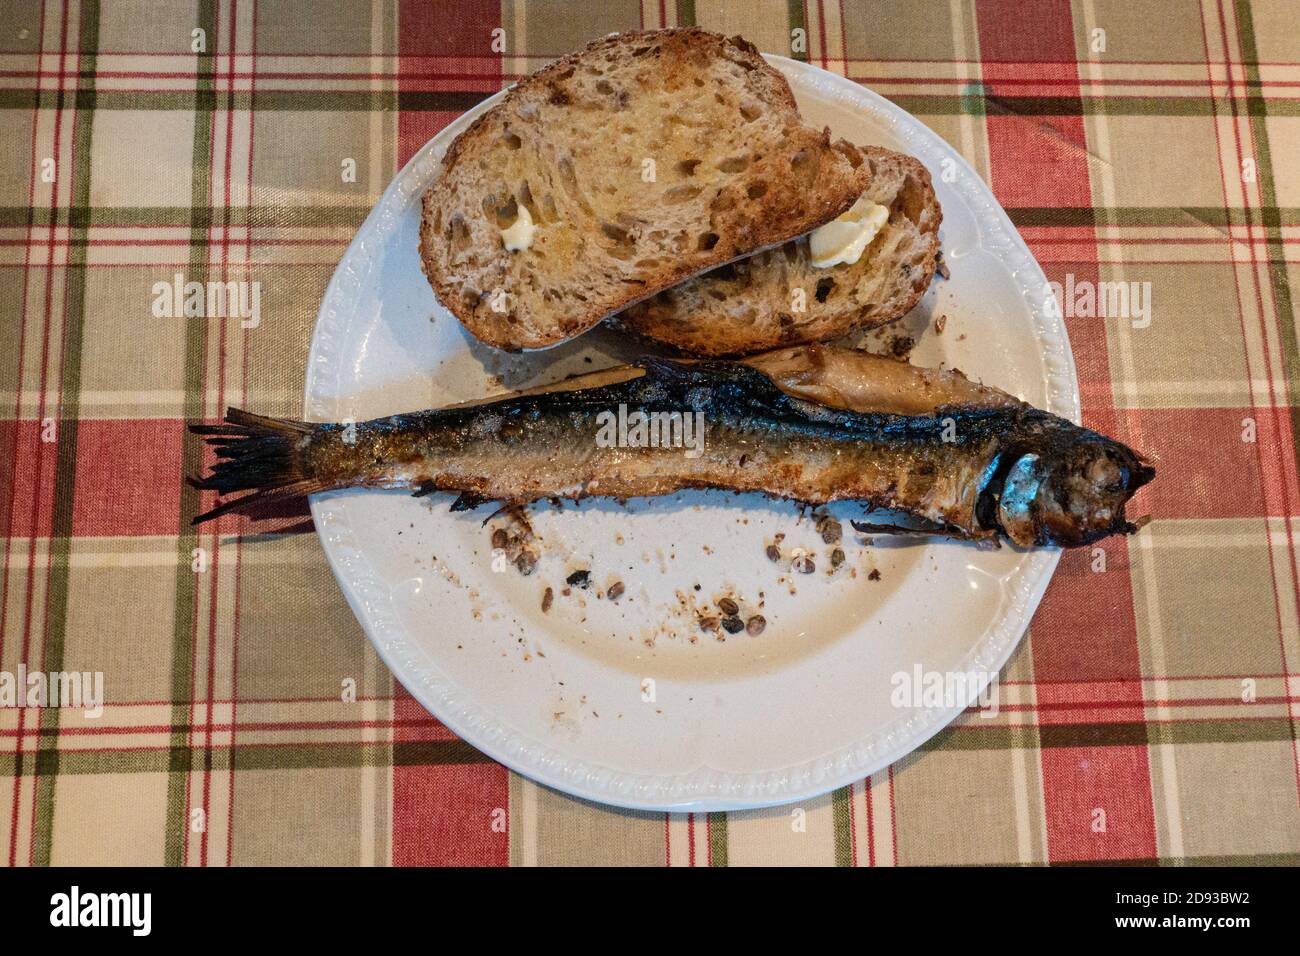 Whole smoked fish (haddock), known as Arbroath Smokies or kipper, on a plate with buttered sourdough toast on a tartan tablecloth, Scotland, UK Stock Photo